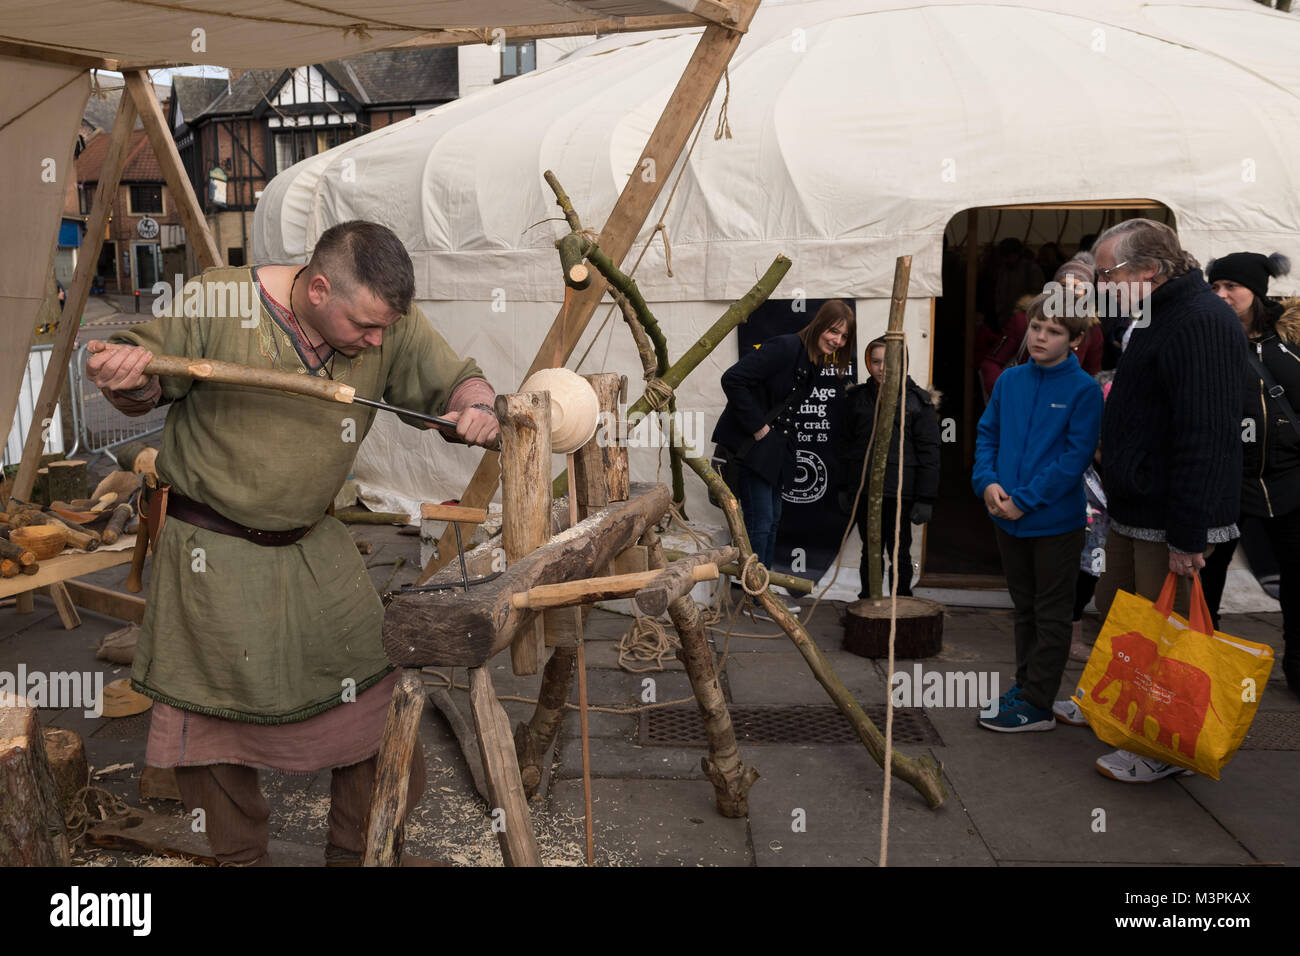 York, UK, 12th February 2018. Person dressed as a Viking at the annual Jorvik Viking Festival held in the city centre of York. This man is a skilled wood-turner & is concentrating on crafting a wooden bowl, using a simple lathe & handmade tools. He is taking part in the realistic re-enactment of life at a Viking market & is being watched by members of the public, who are standing close by, fascinated. North Yorkshire, England, UK. Credit: Ian Lamond/Alamy Live News Stock Photo